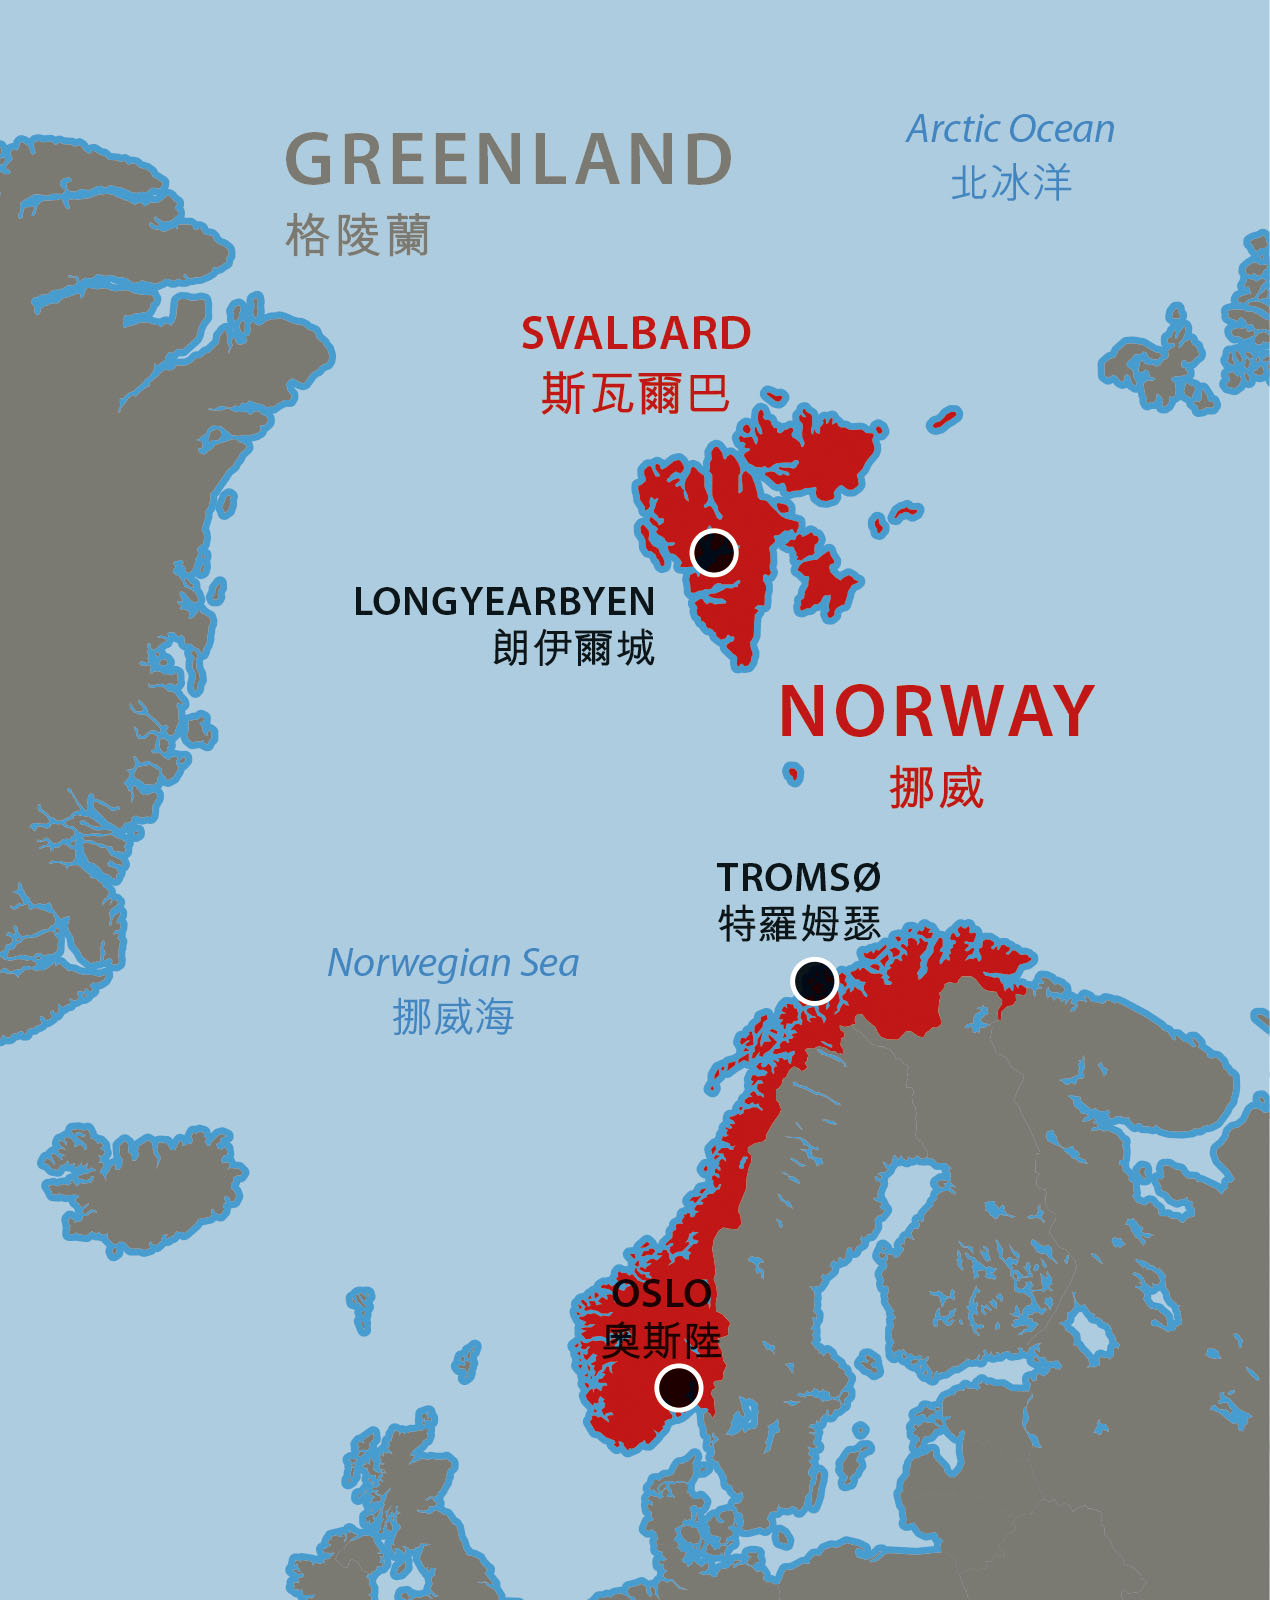 http://discovery.cathaypacific.com/wp-content/uploads/2017/01/svalbard-map.jpg